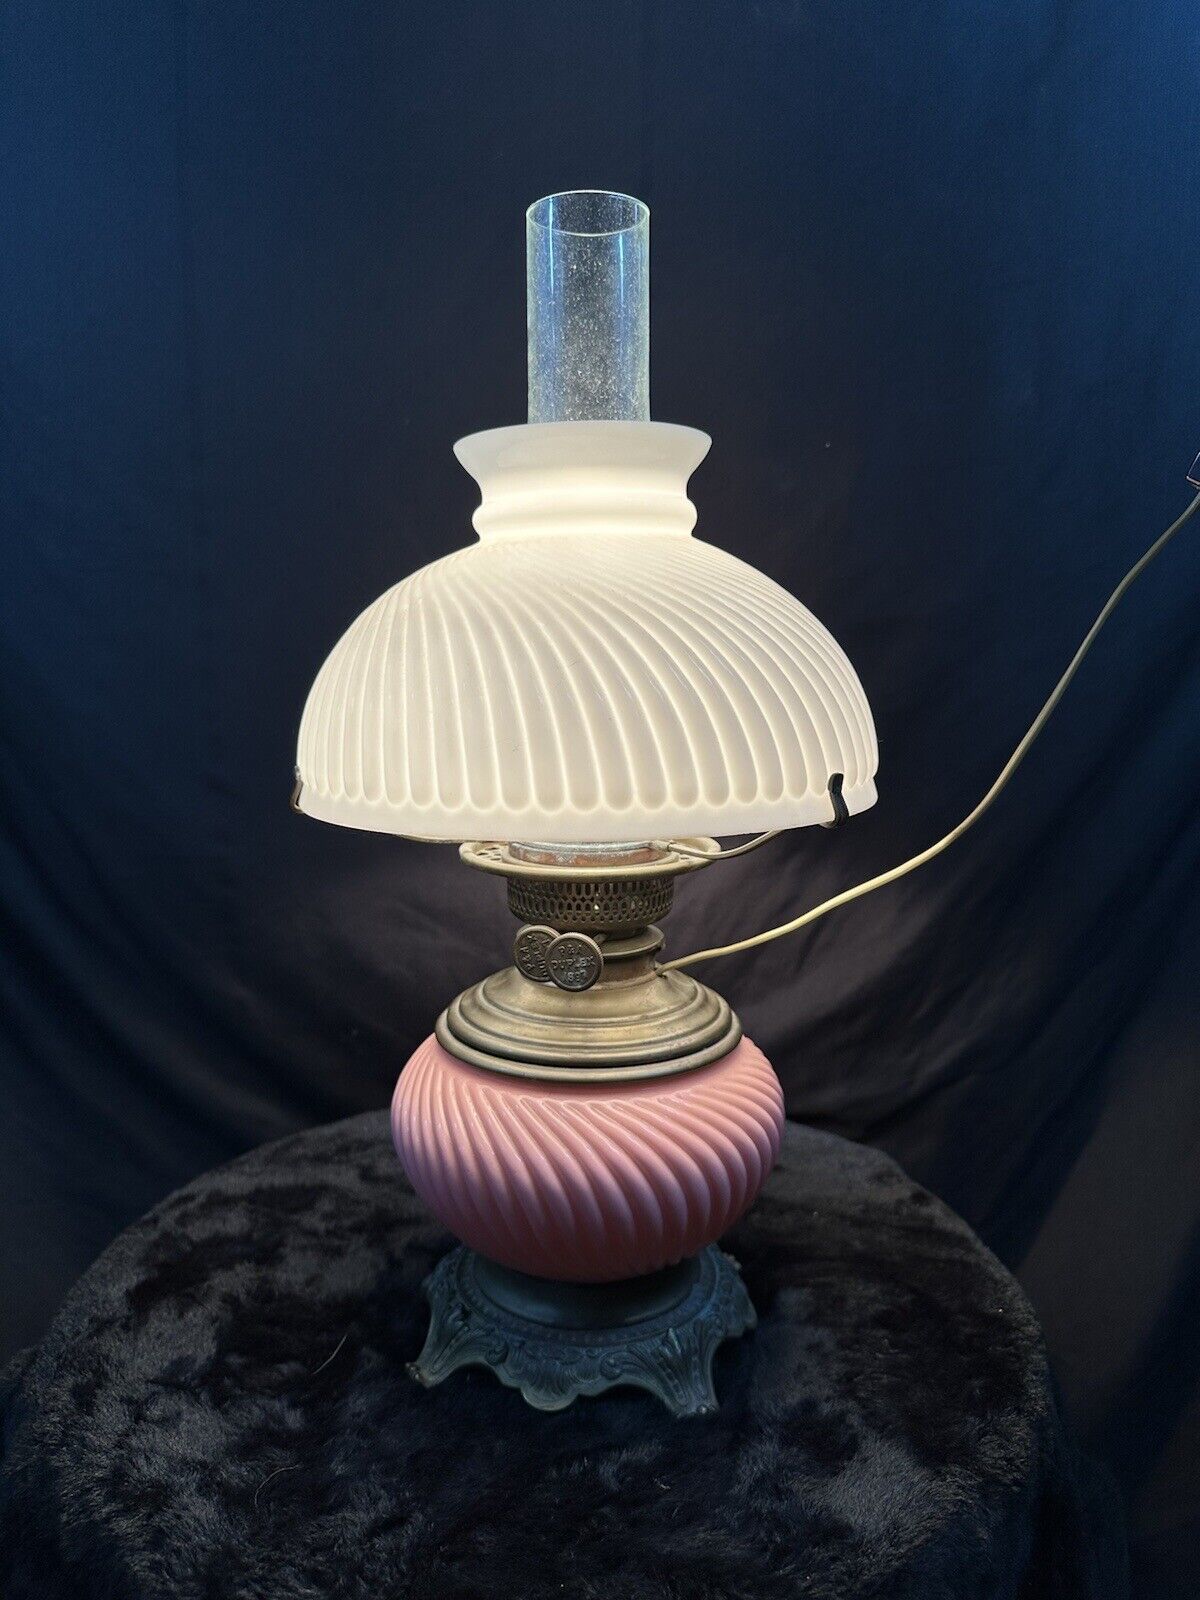 Antique Pink & White Electrified Rayo Oil Lamp By P&A Duplex 1897 19 1/2” H